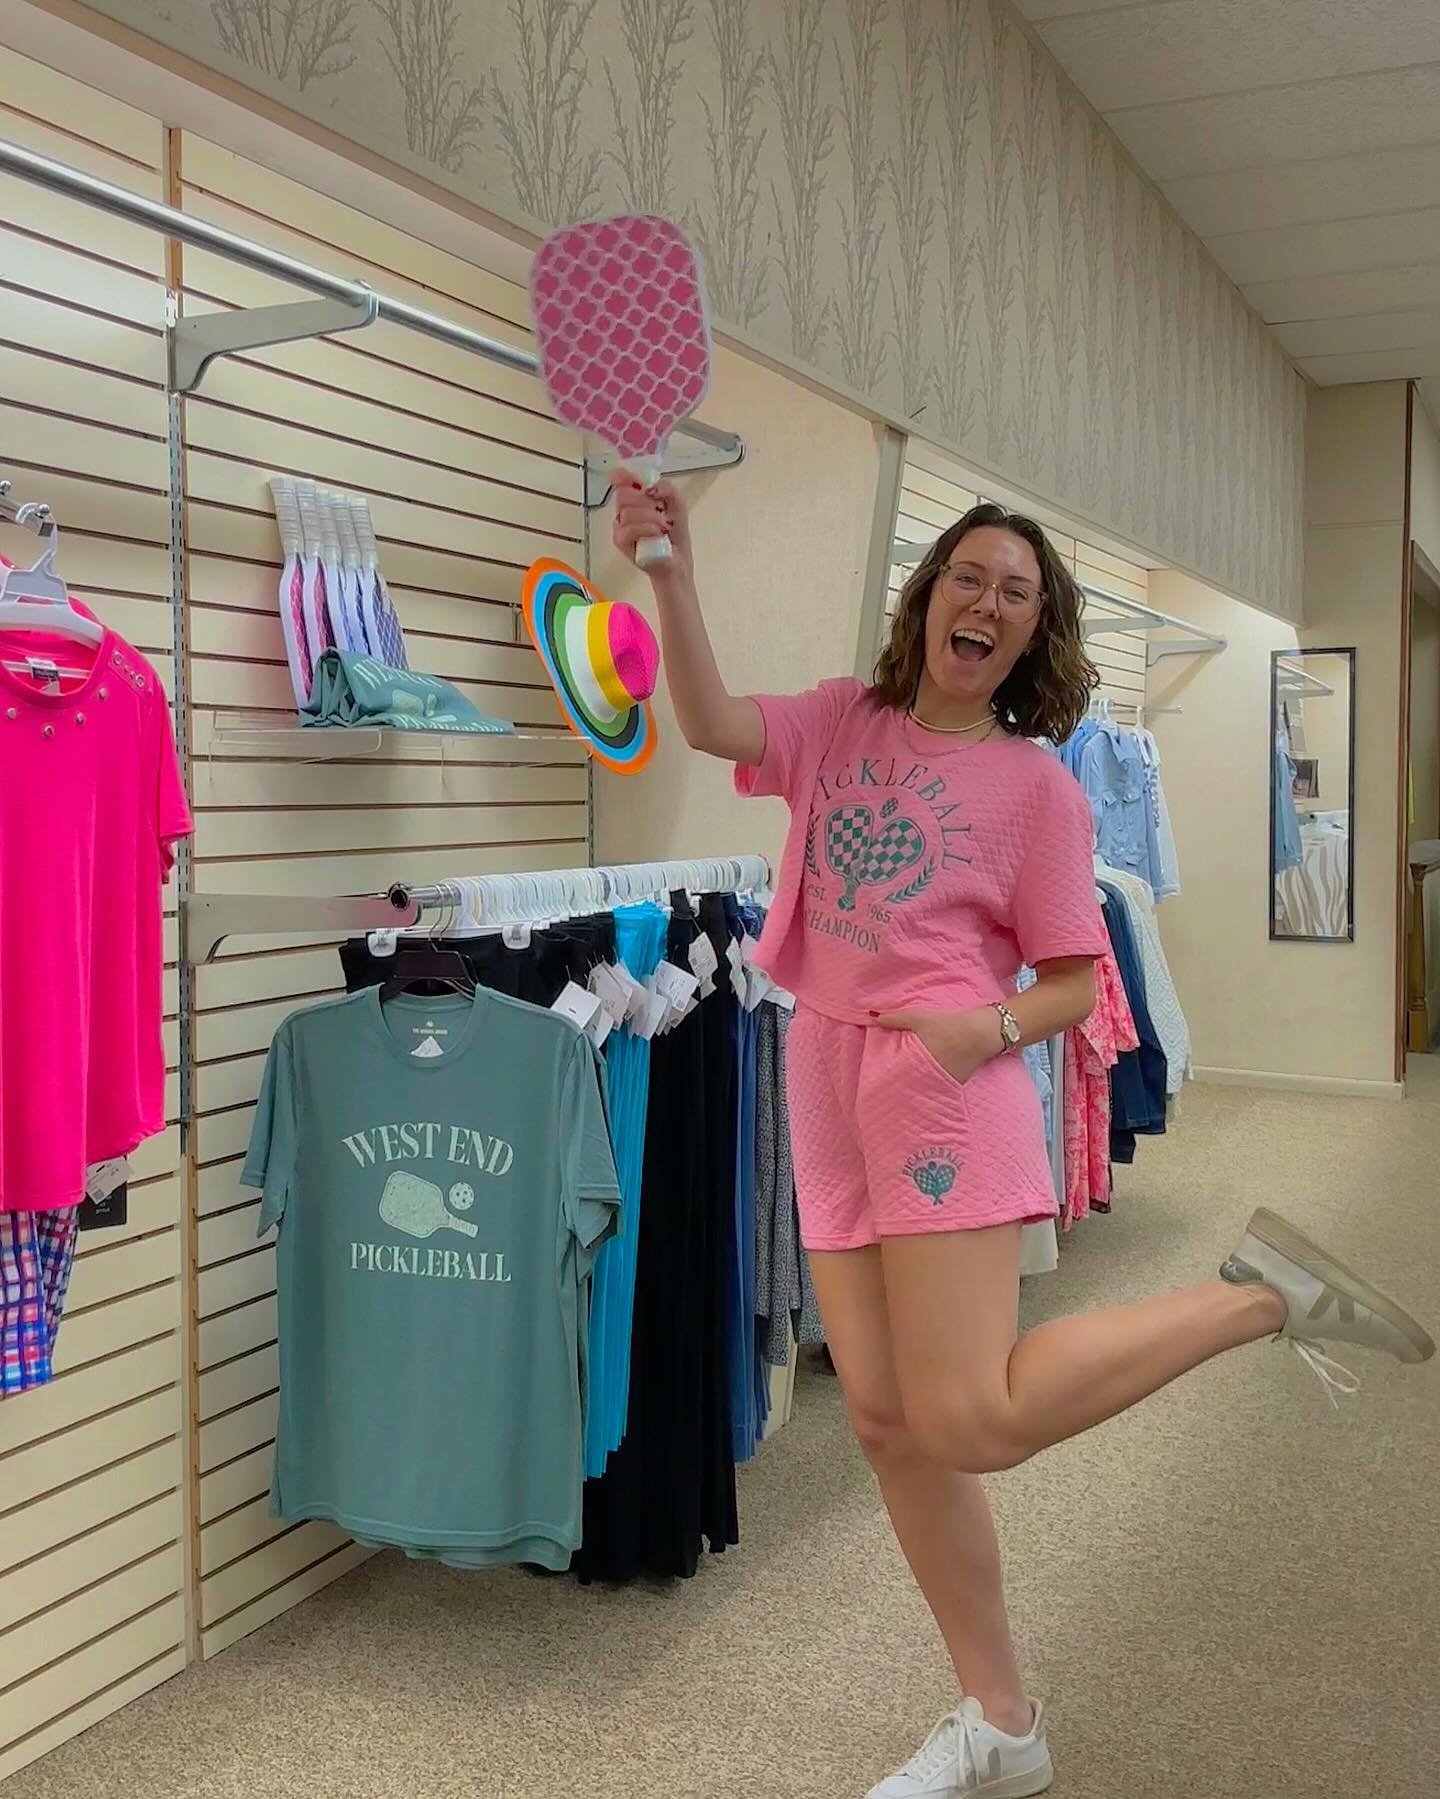 Stephenson&rsquo;s pickleball, anyone?! Stop in and check out our new pickleball collection, featuring paddles, the cutest pink athleisure set, and a men&rsquo;s tee shirt! 

#pickleball #athleisure #lounge #style